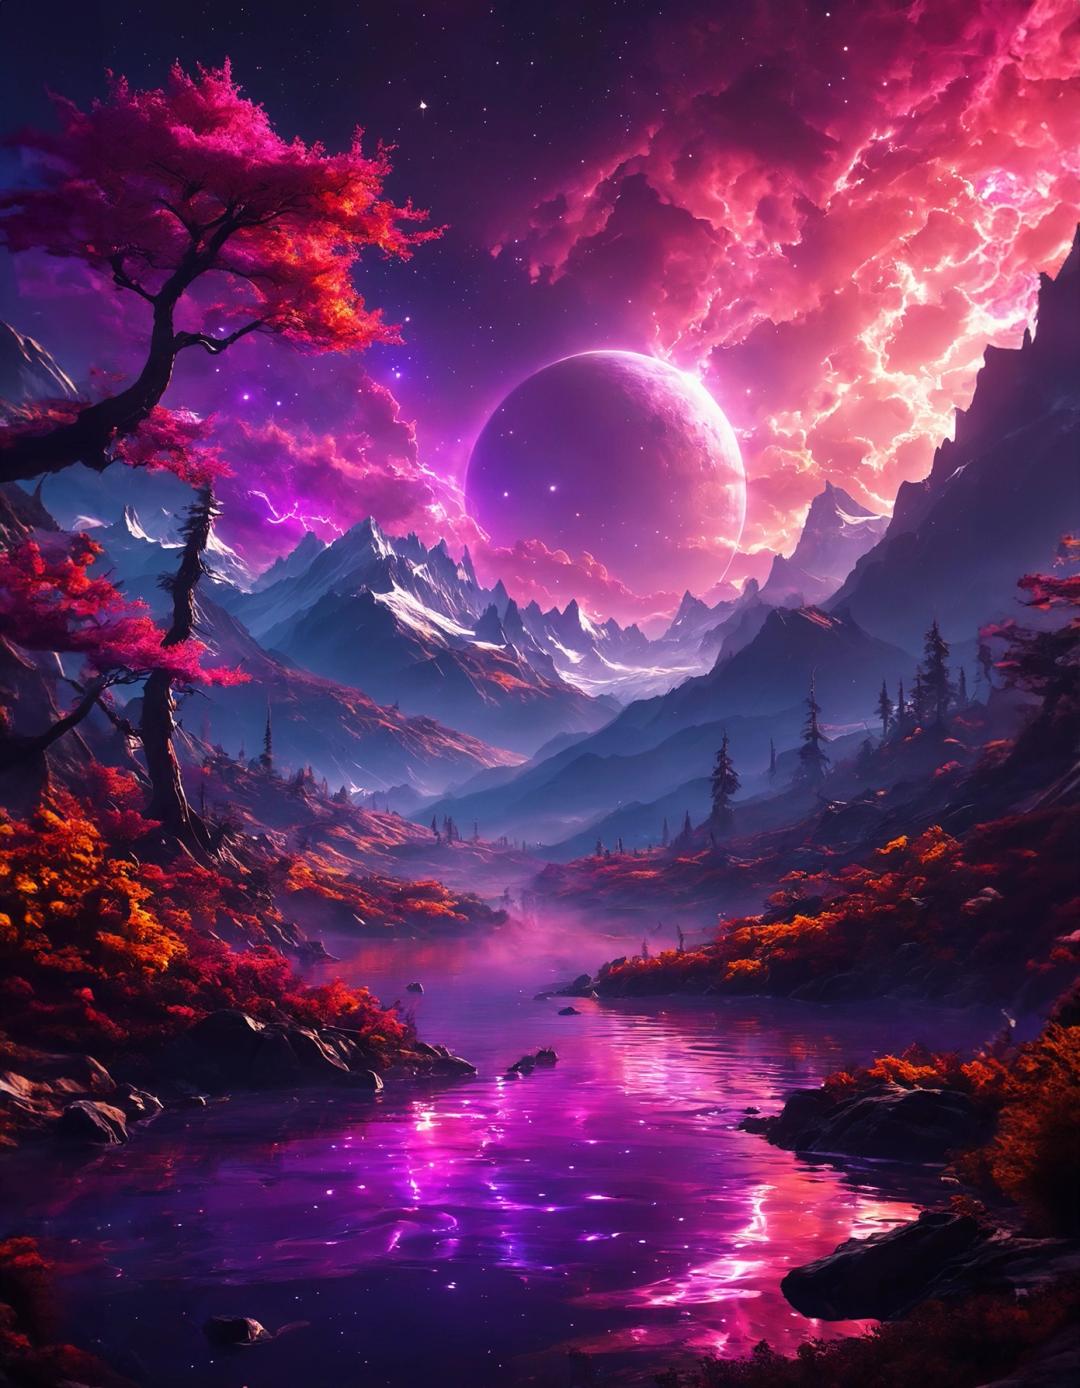 painting of a purple sky with mountains and a river in the foreground and a purple moon